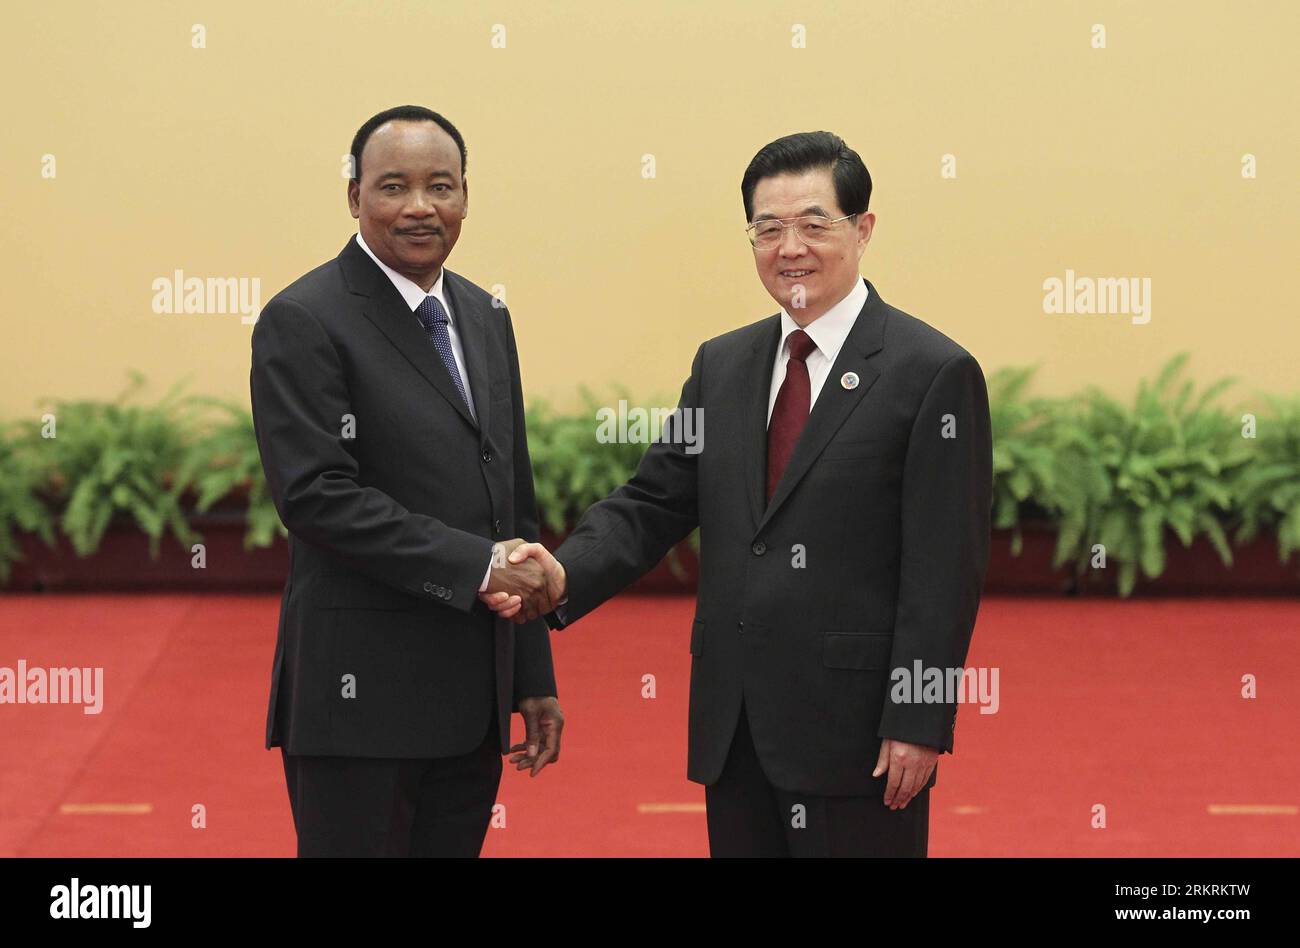 Bildnummer: 58276003  Datum: 19.07.2012  Copyright: imago/Xinhua (120719) -- BEIJING, July 19, 2012 (Xinhua) -- Chinese President Hu Jintao (R) shakes hands with Niger s President Mahamadou Issoufou as they attend the opening ceremony of the Fifth Ministerial Conference of the Forum on China-Africa Cooperation (FOCAC) in Beijing, capital of China, July 19, 2012. (Xinhua/Ding Lin) (lfj) CHINA-BEIJING-FOCAC-MINISTERIAL CONFERENCE-MEETING (CN) PUBLICATIONxNOTxINxCHN People Politik FOCAC Gipfel xjh x0x 2012 quer      58276003 Date 19 07 2012 Copyright Imago XINHUA  Beijing July 19 2012 XINHUA Chin Stock Photo